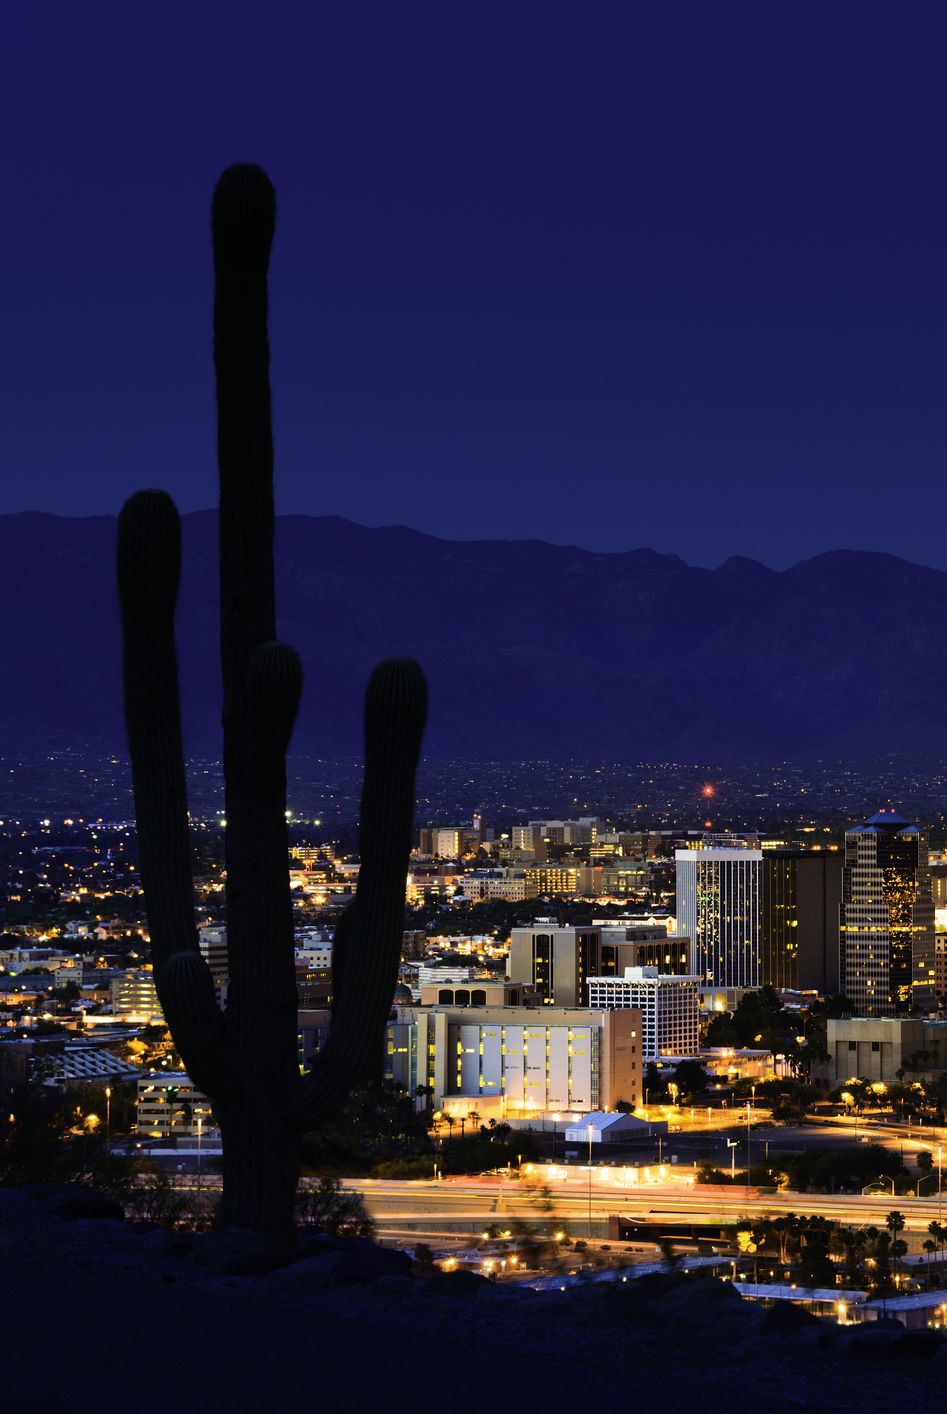 tucson arizona at night framed by saguaro cactus and mountains